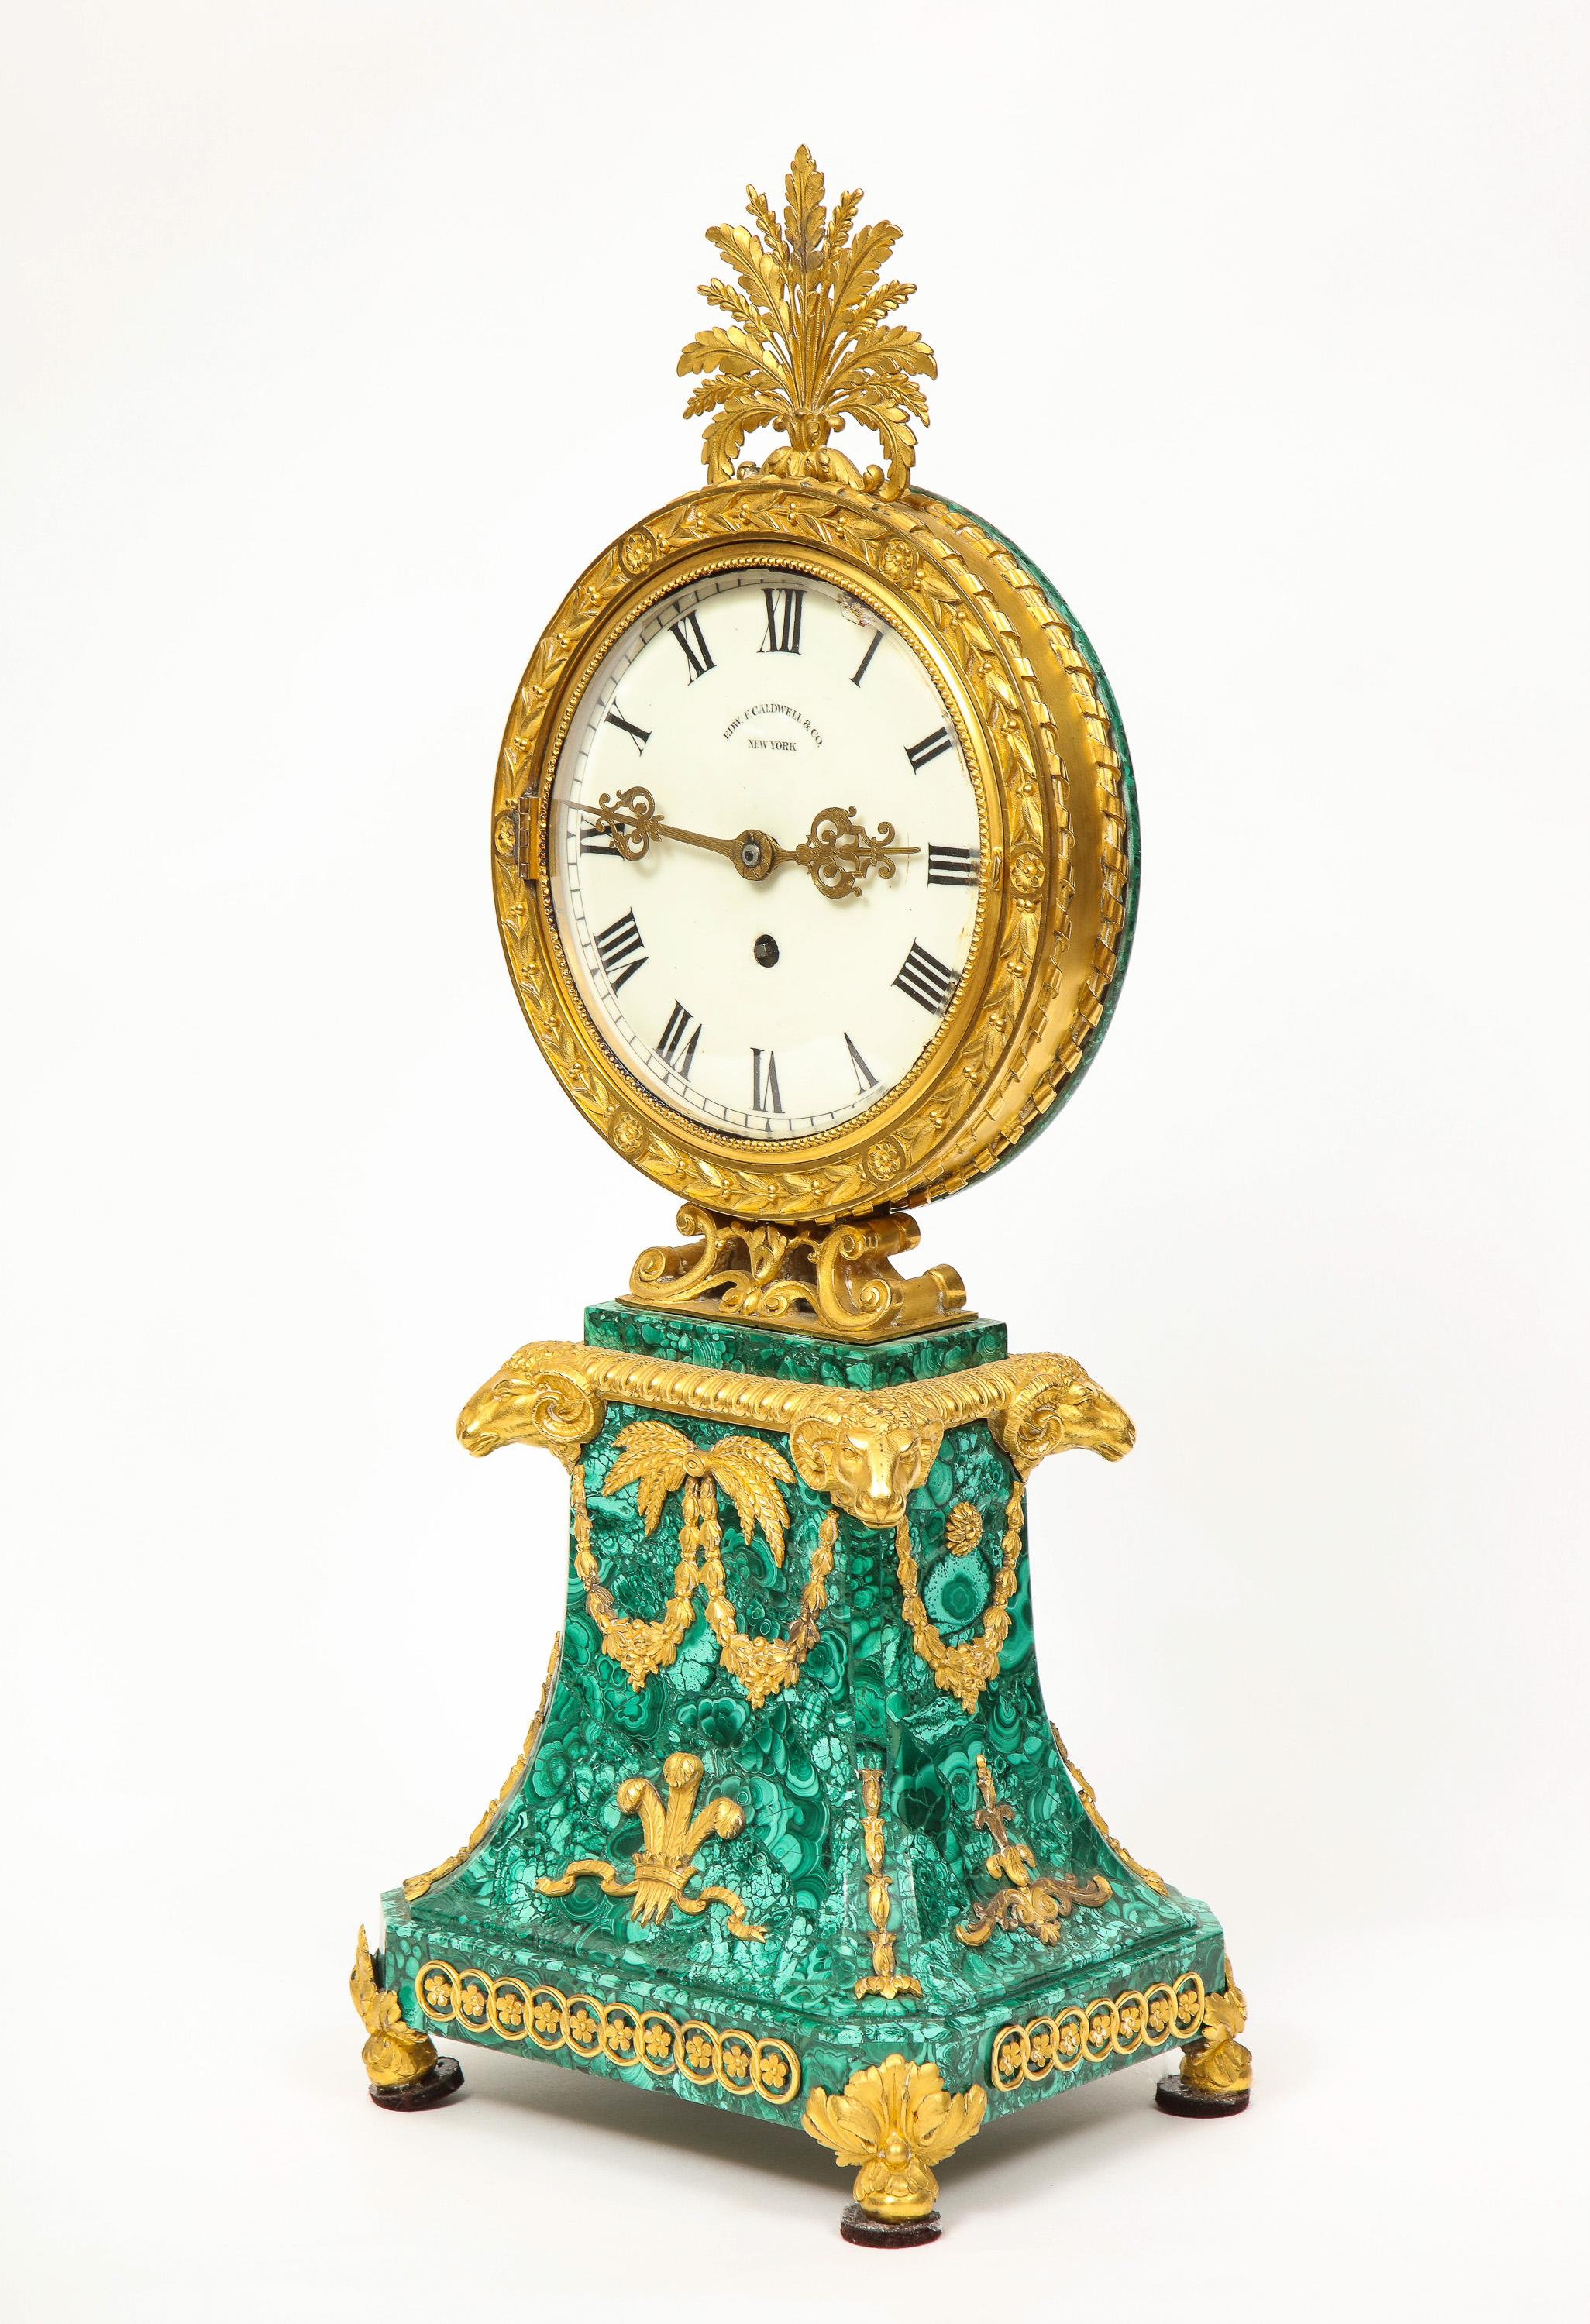 Bronze Edward F. Caldwell, An Extremely Fine and Rare Ormolu-Mounted Malachite Clock For Sale